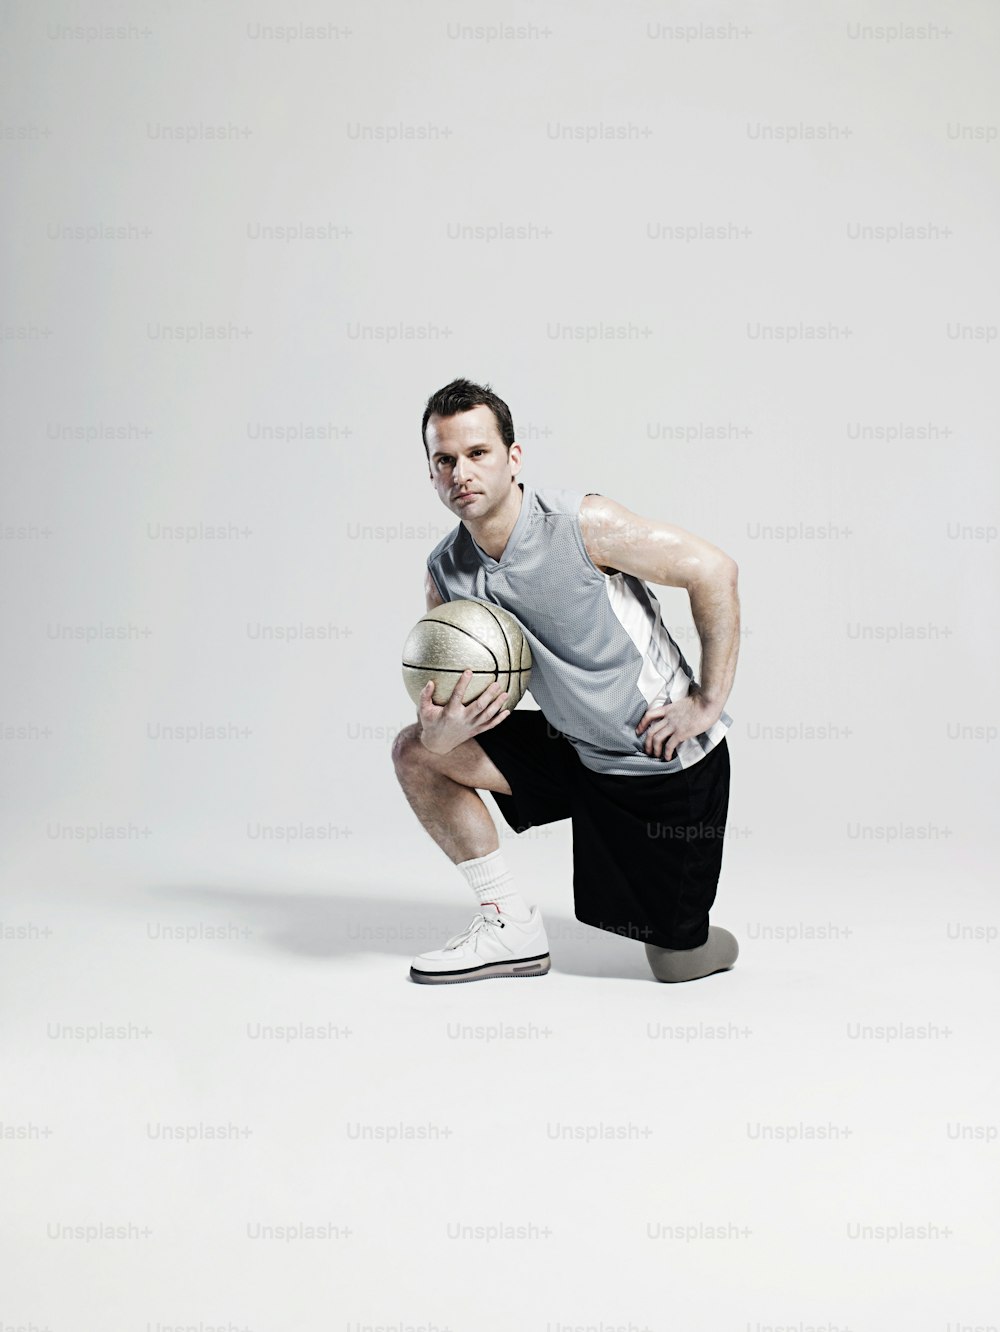 a man kneeling down holding a basketball